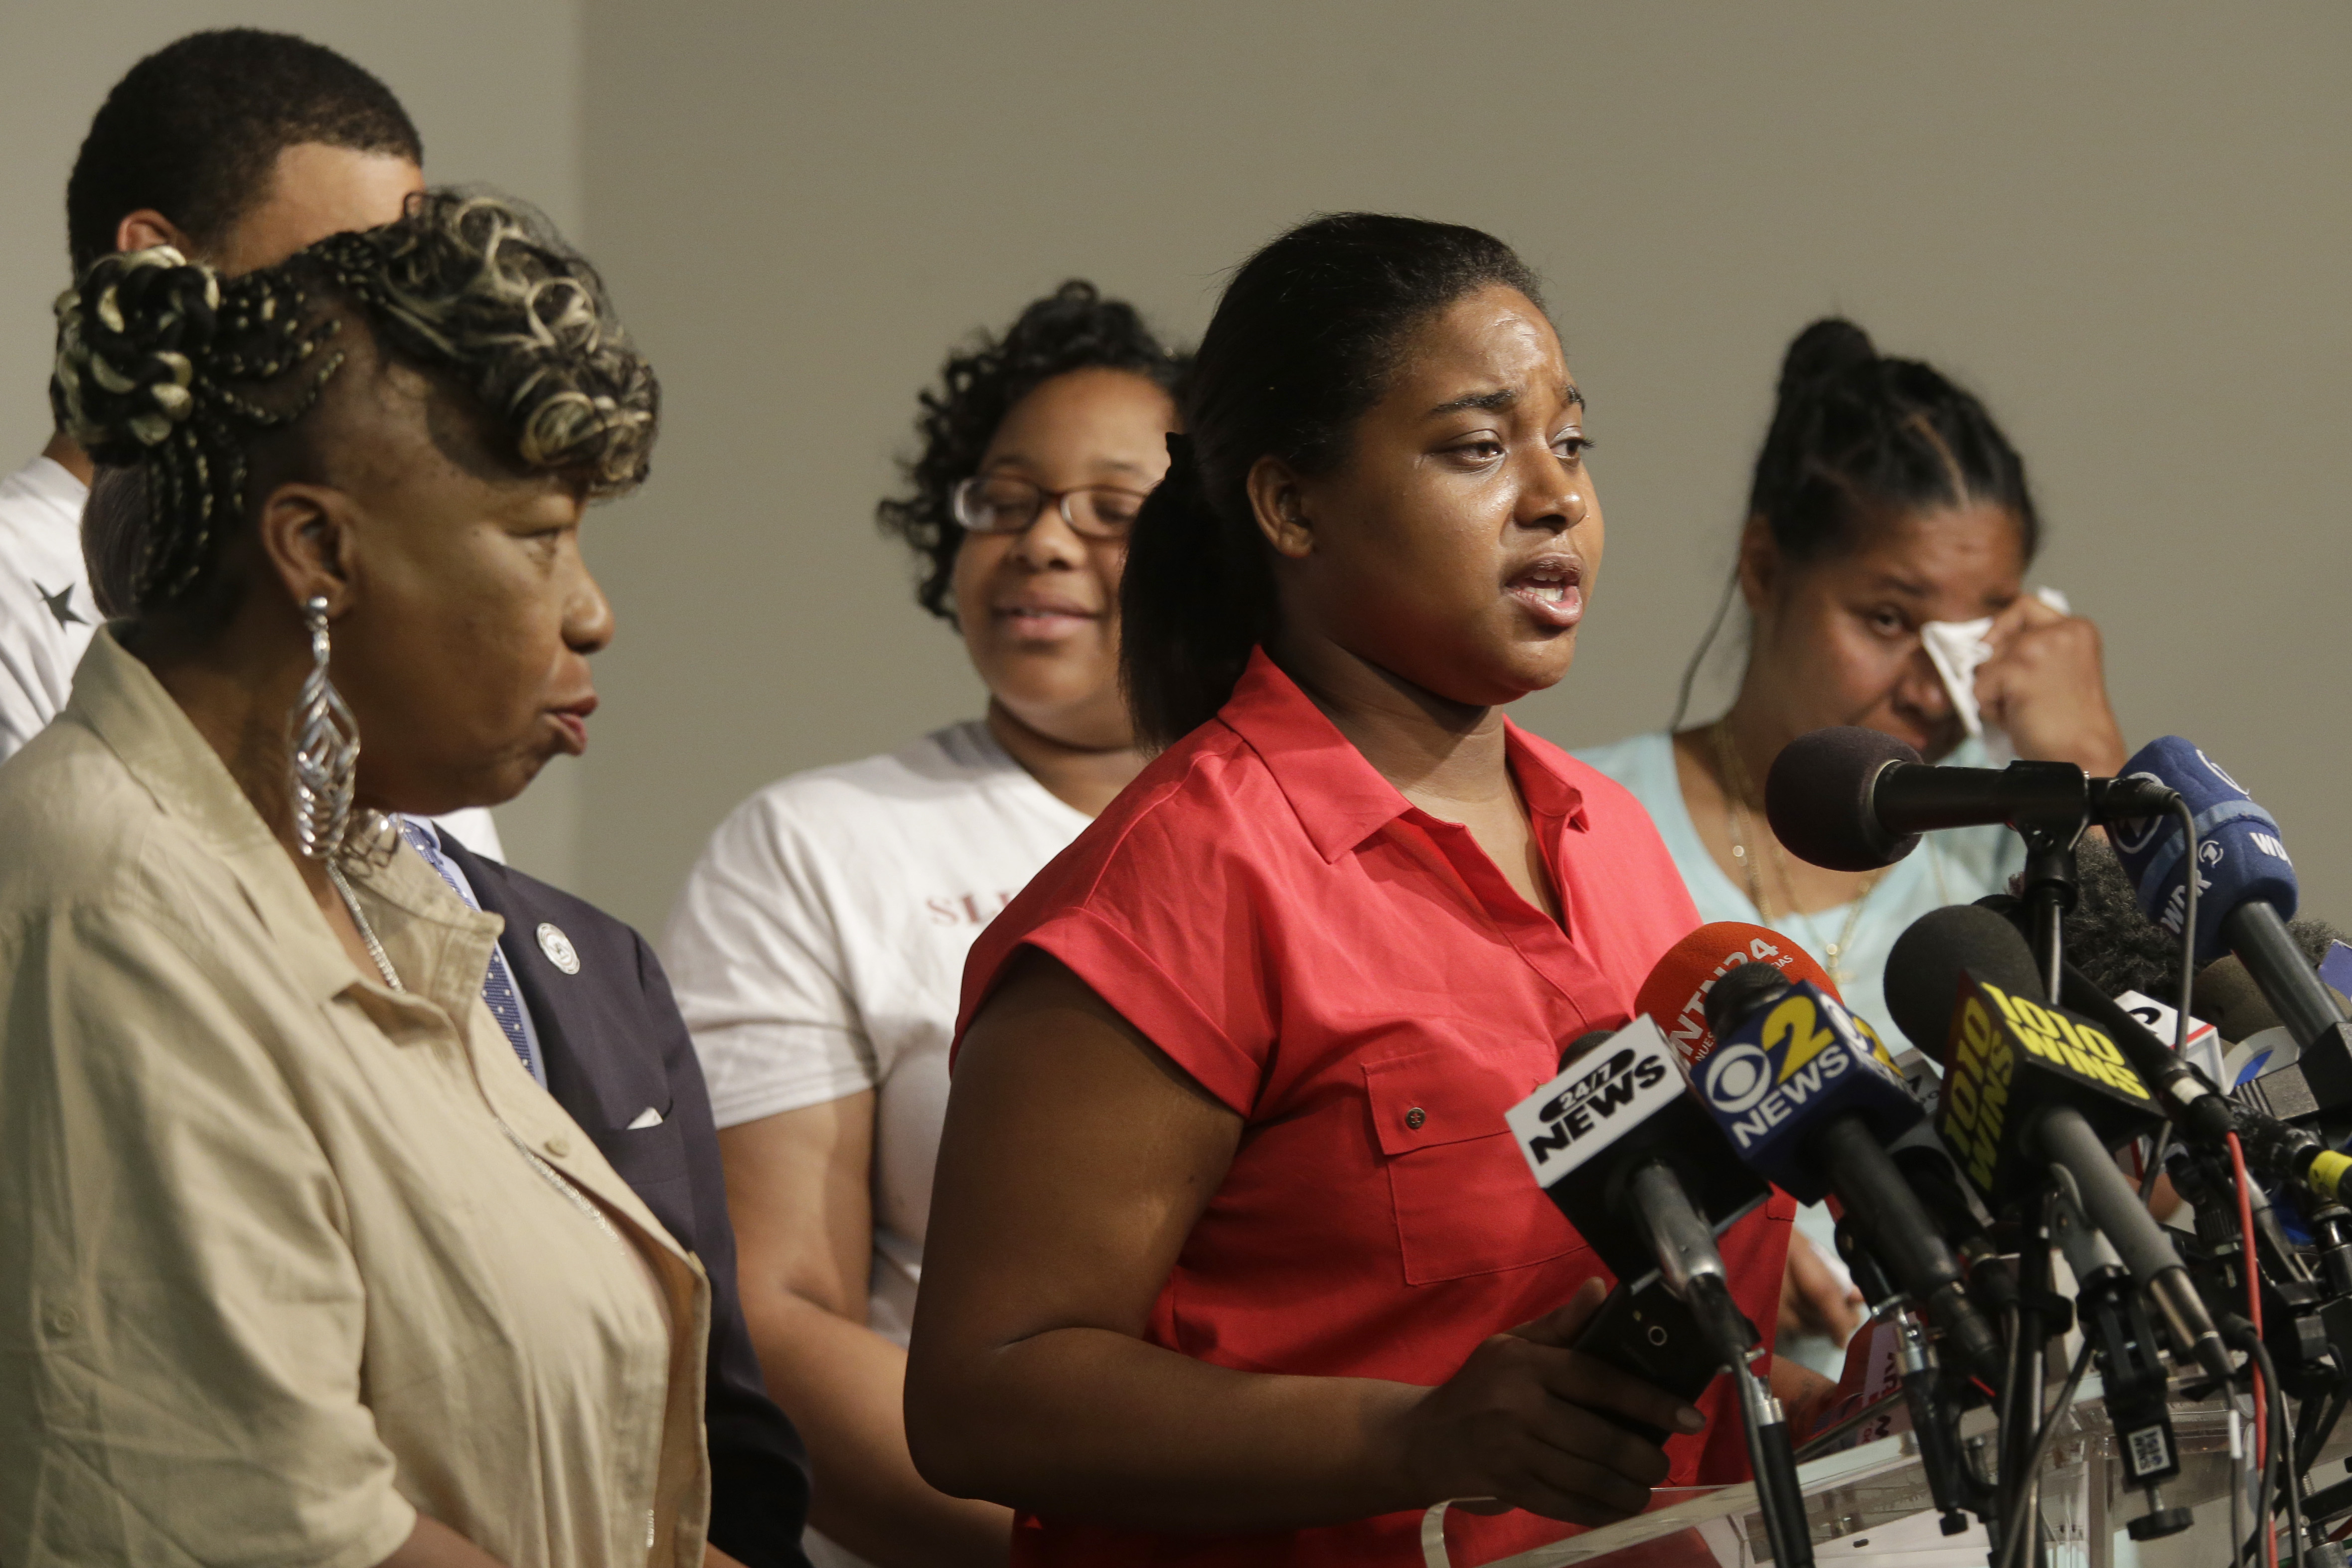 Eric Garner's daughter Erica Garner, center, is joined by family members as she speaks during a news conference in 2015. Controversy was recently sparked when, following her death in December, an associate of Erica’s requested that only black journalists reach out to her family with interview requests